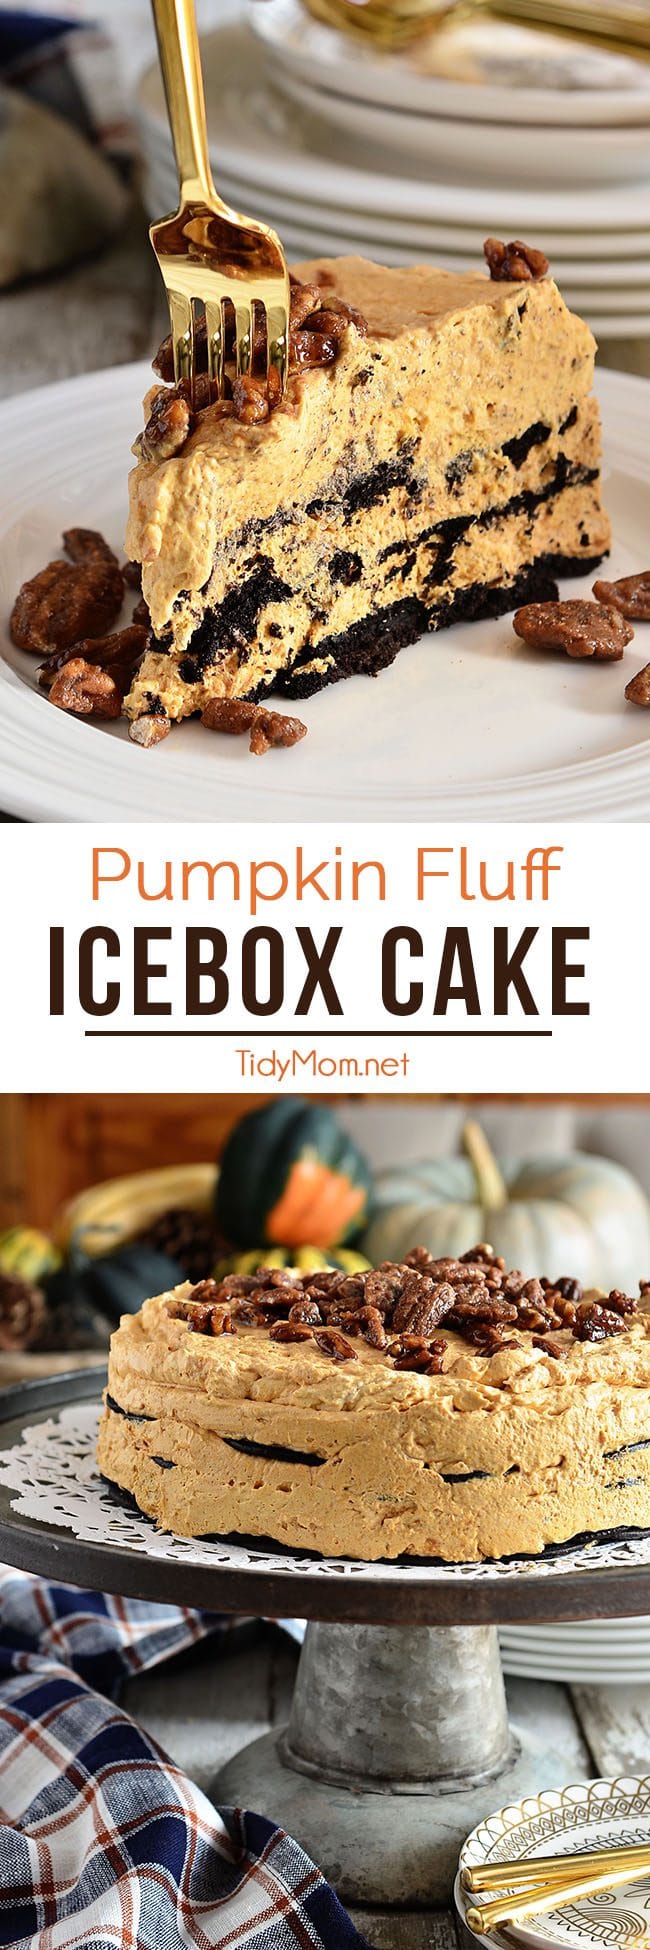 Pumpkin Fluff Icebox Cake is a delicious no-bake dessert that comes together in no time. Making it the perfect make-ahead dessert for Thanksgiving dinner. Get this all-star, easy-to-follow recipe at TidyMom.net